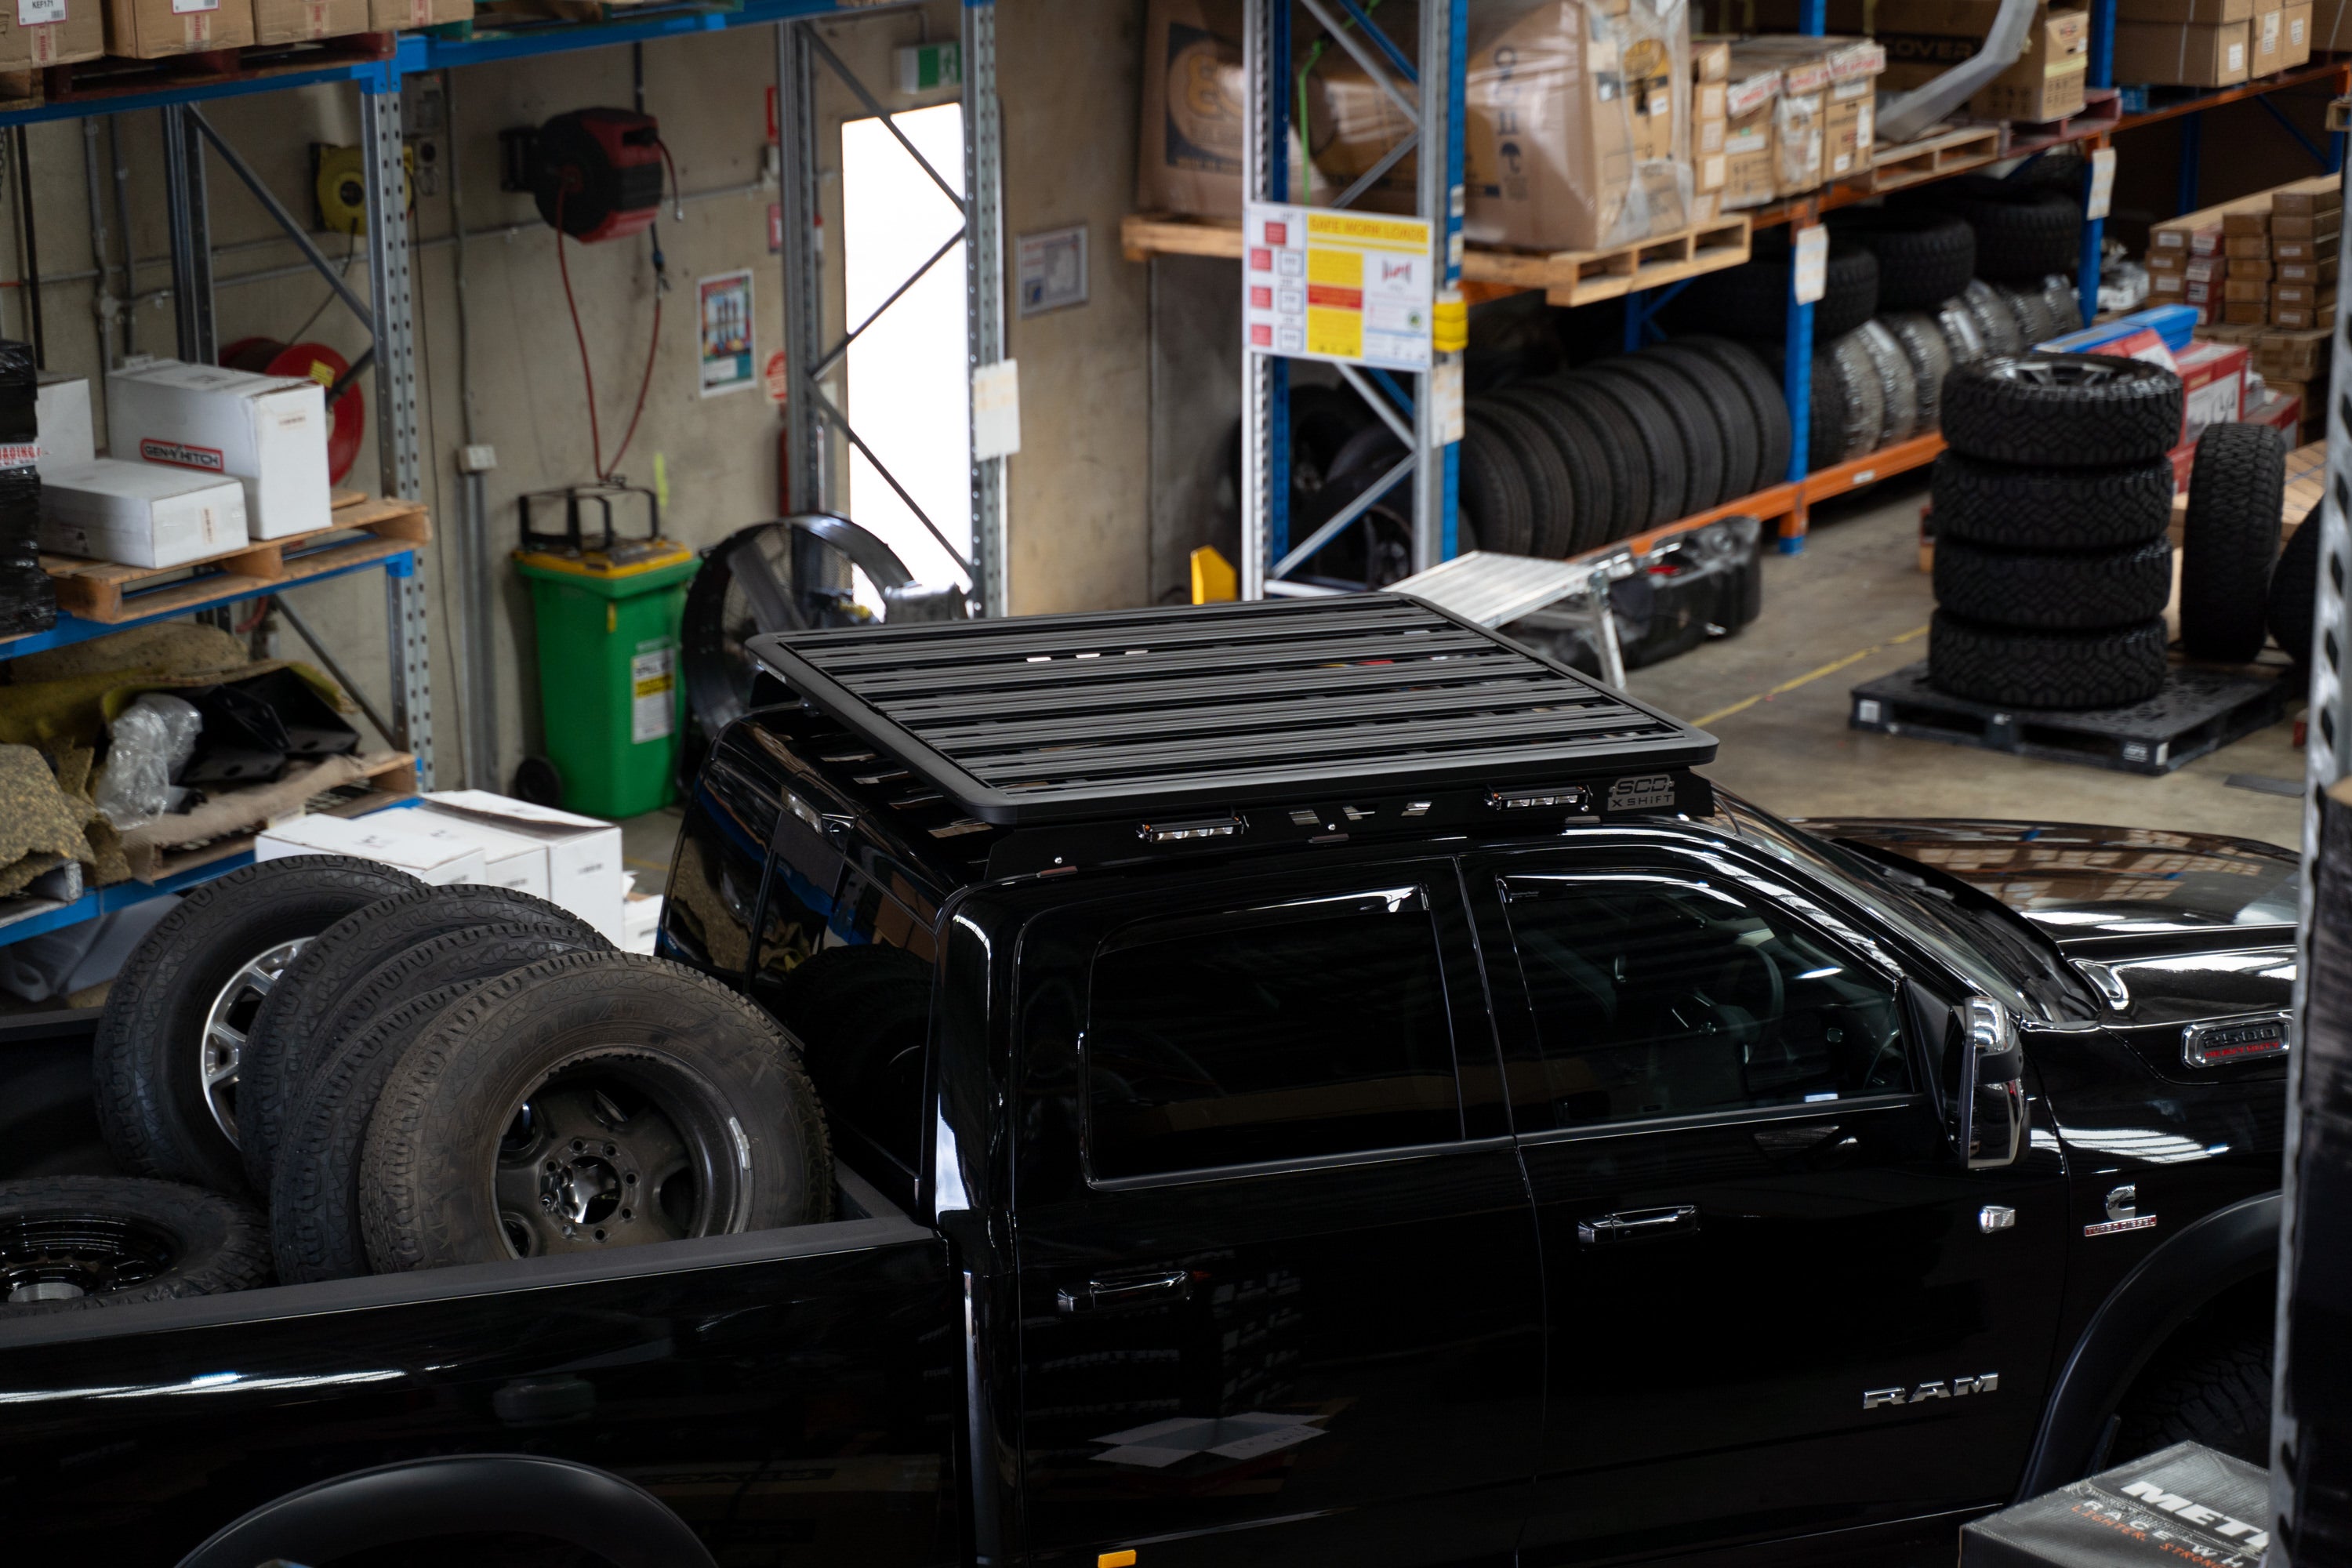 RAM 2500/3500 Shift Industries Roof Rack Storage System